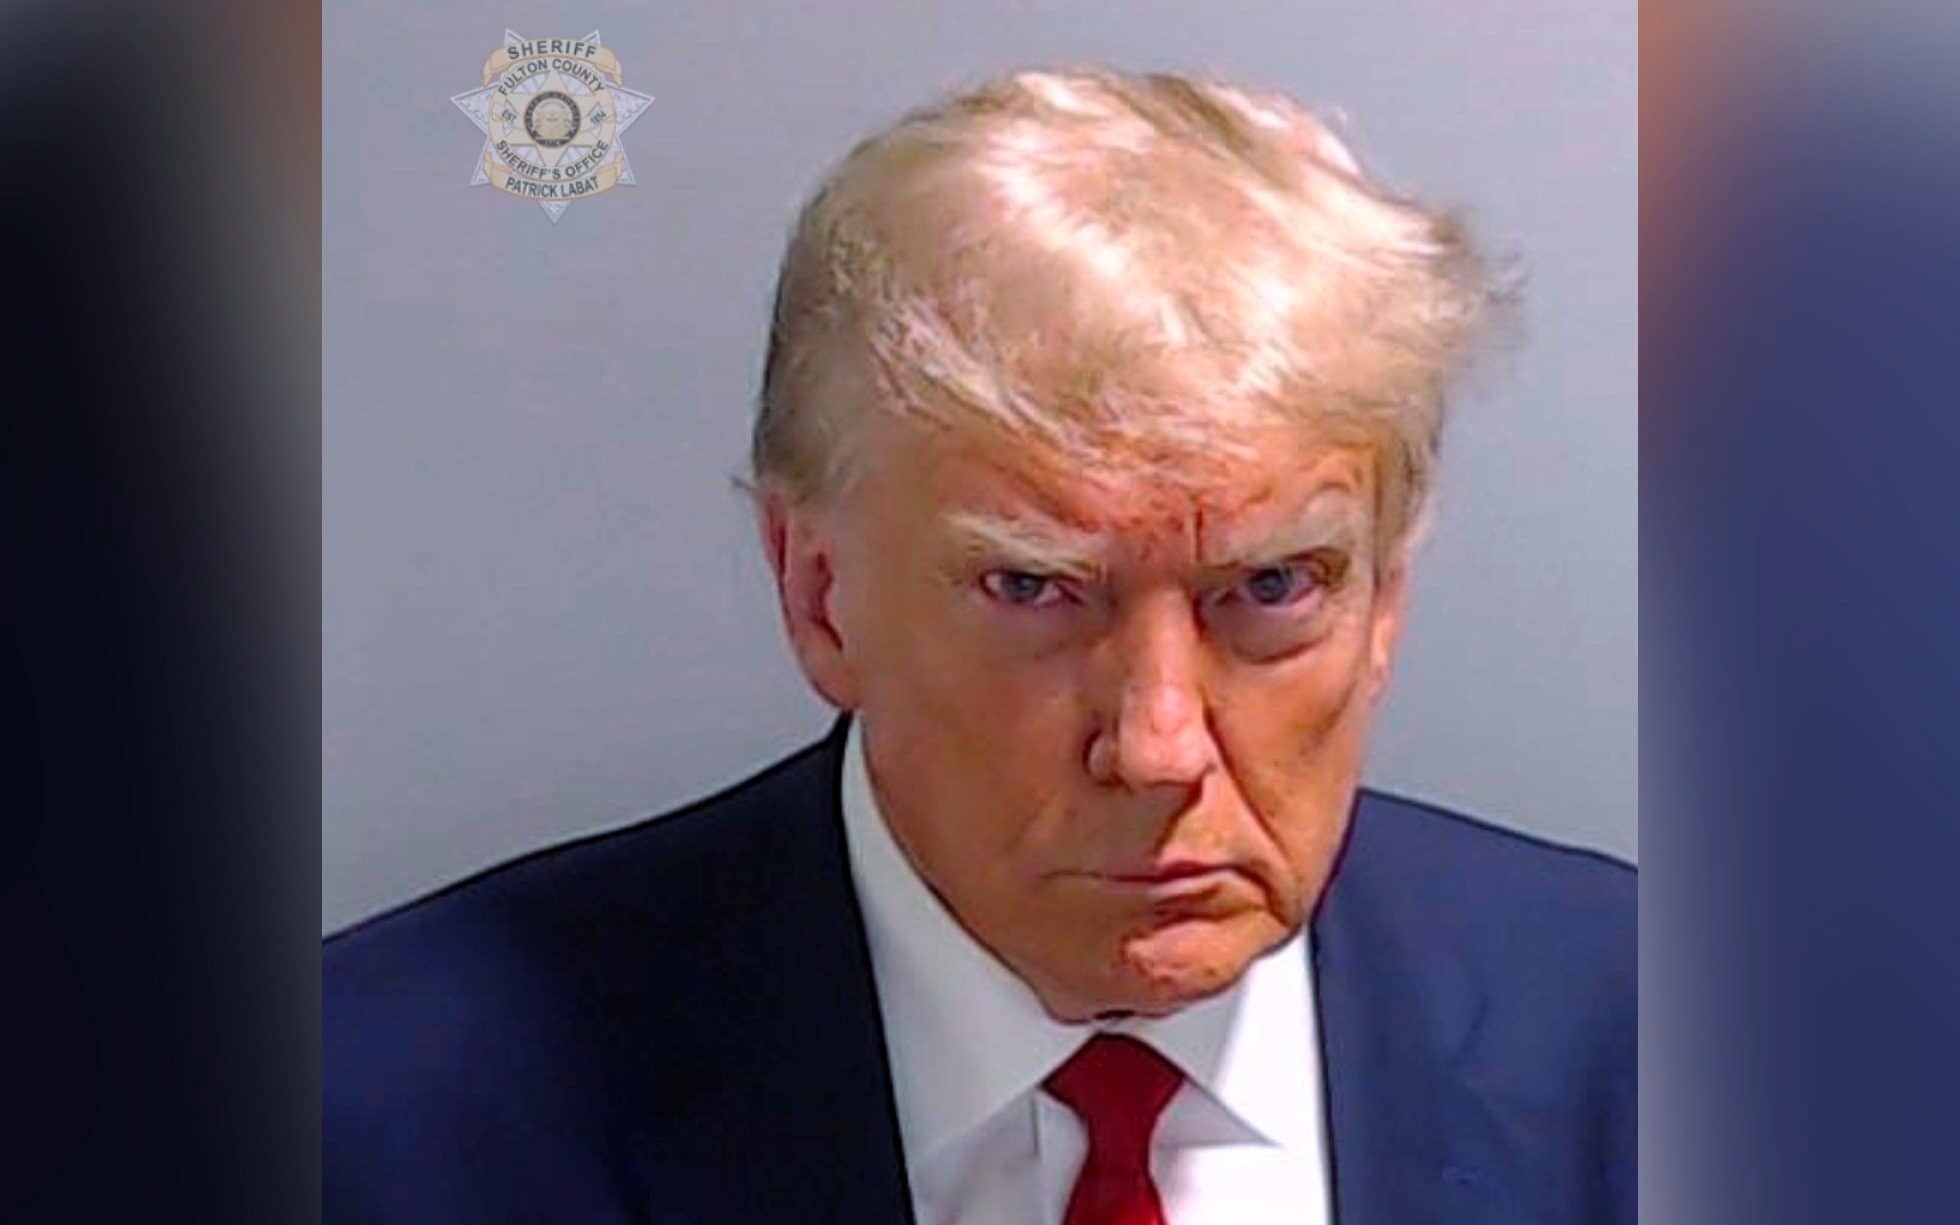 Could Donald Trump go to prison after being convicted?